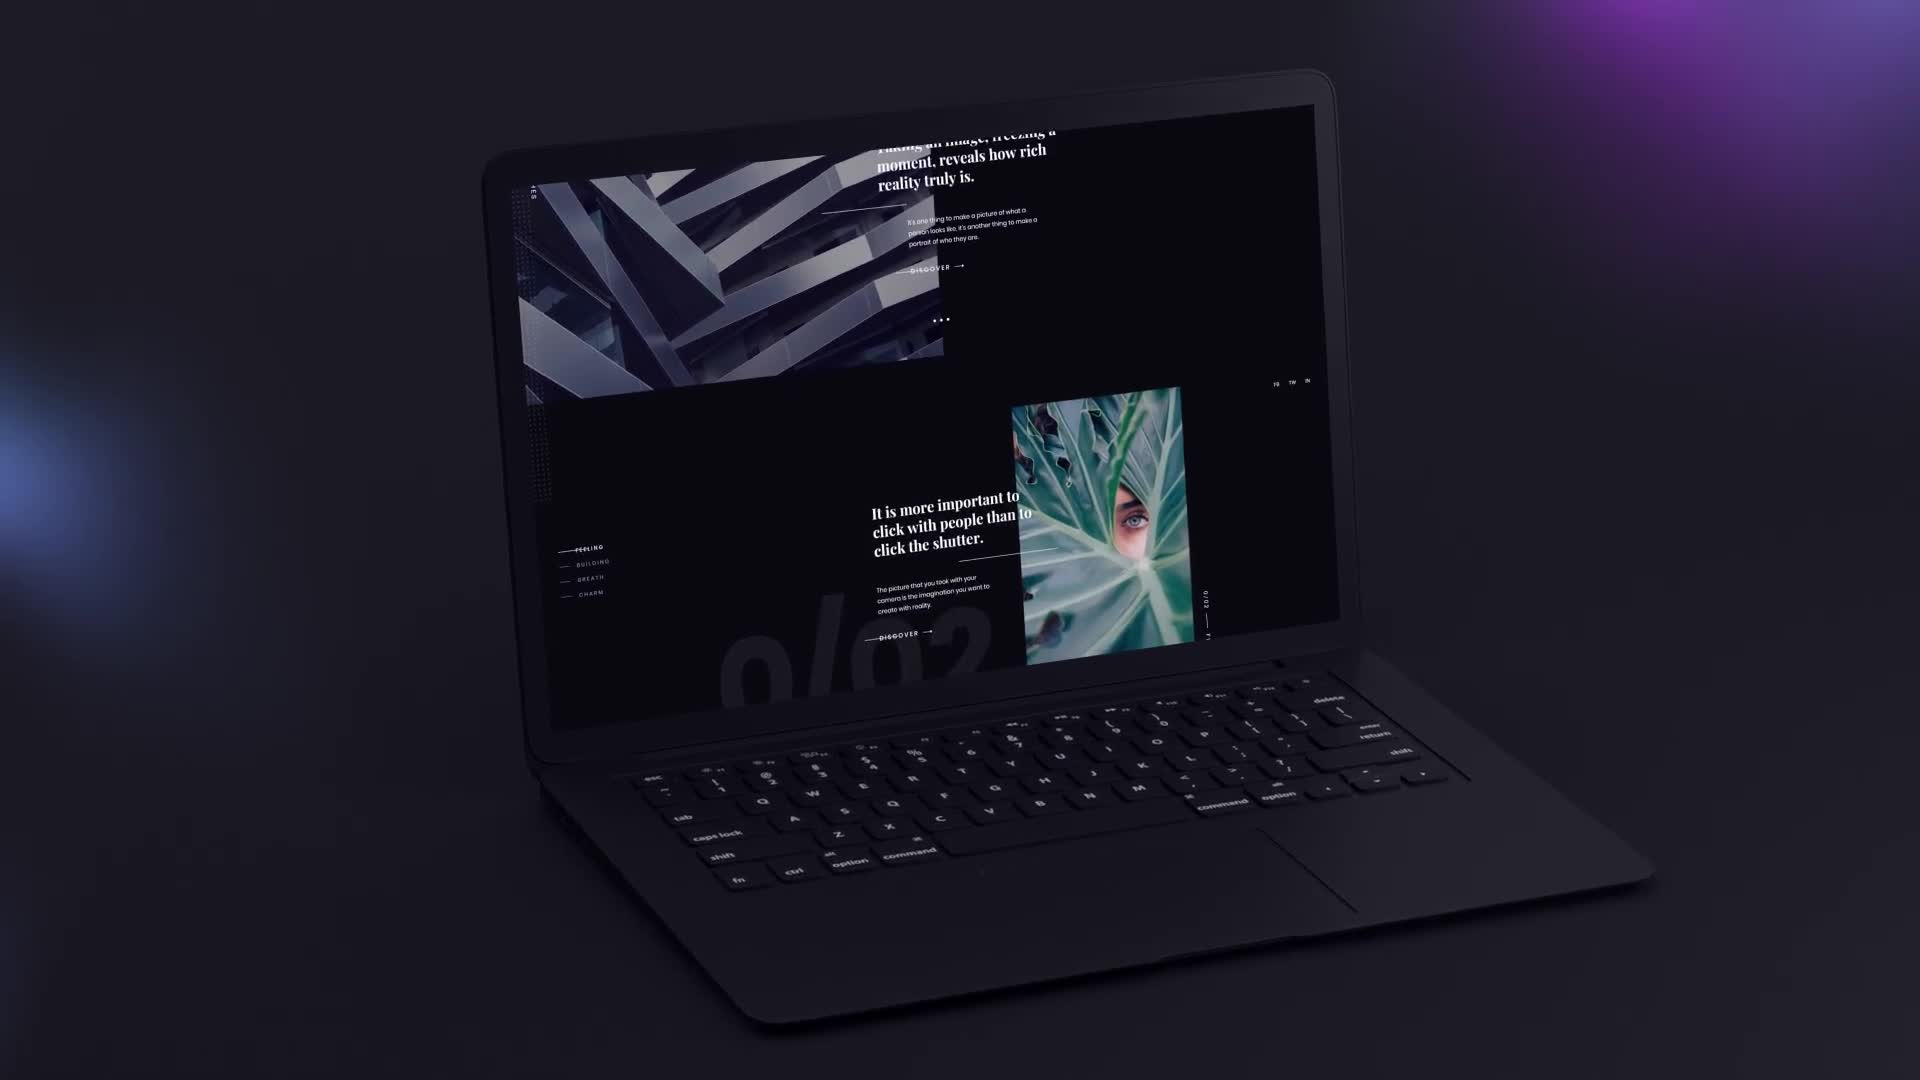 Download Animated Laptop Mockup 2 in 1 Direct Download 23431296 ...